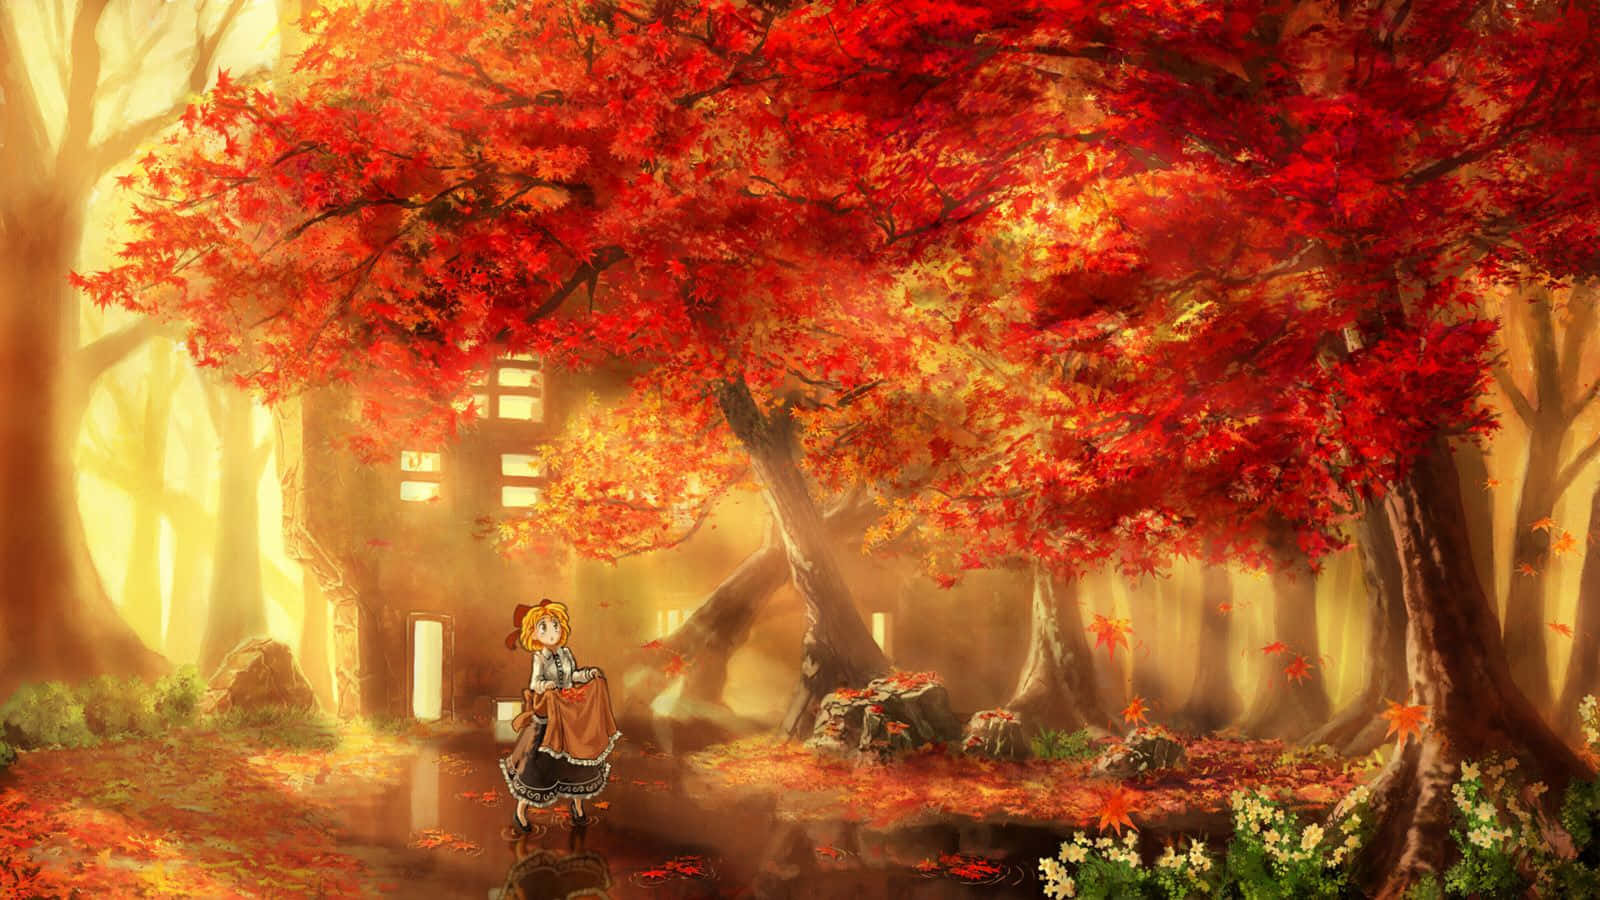 Take a tranquil break in this peaceful Anime forest.